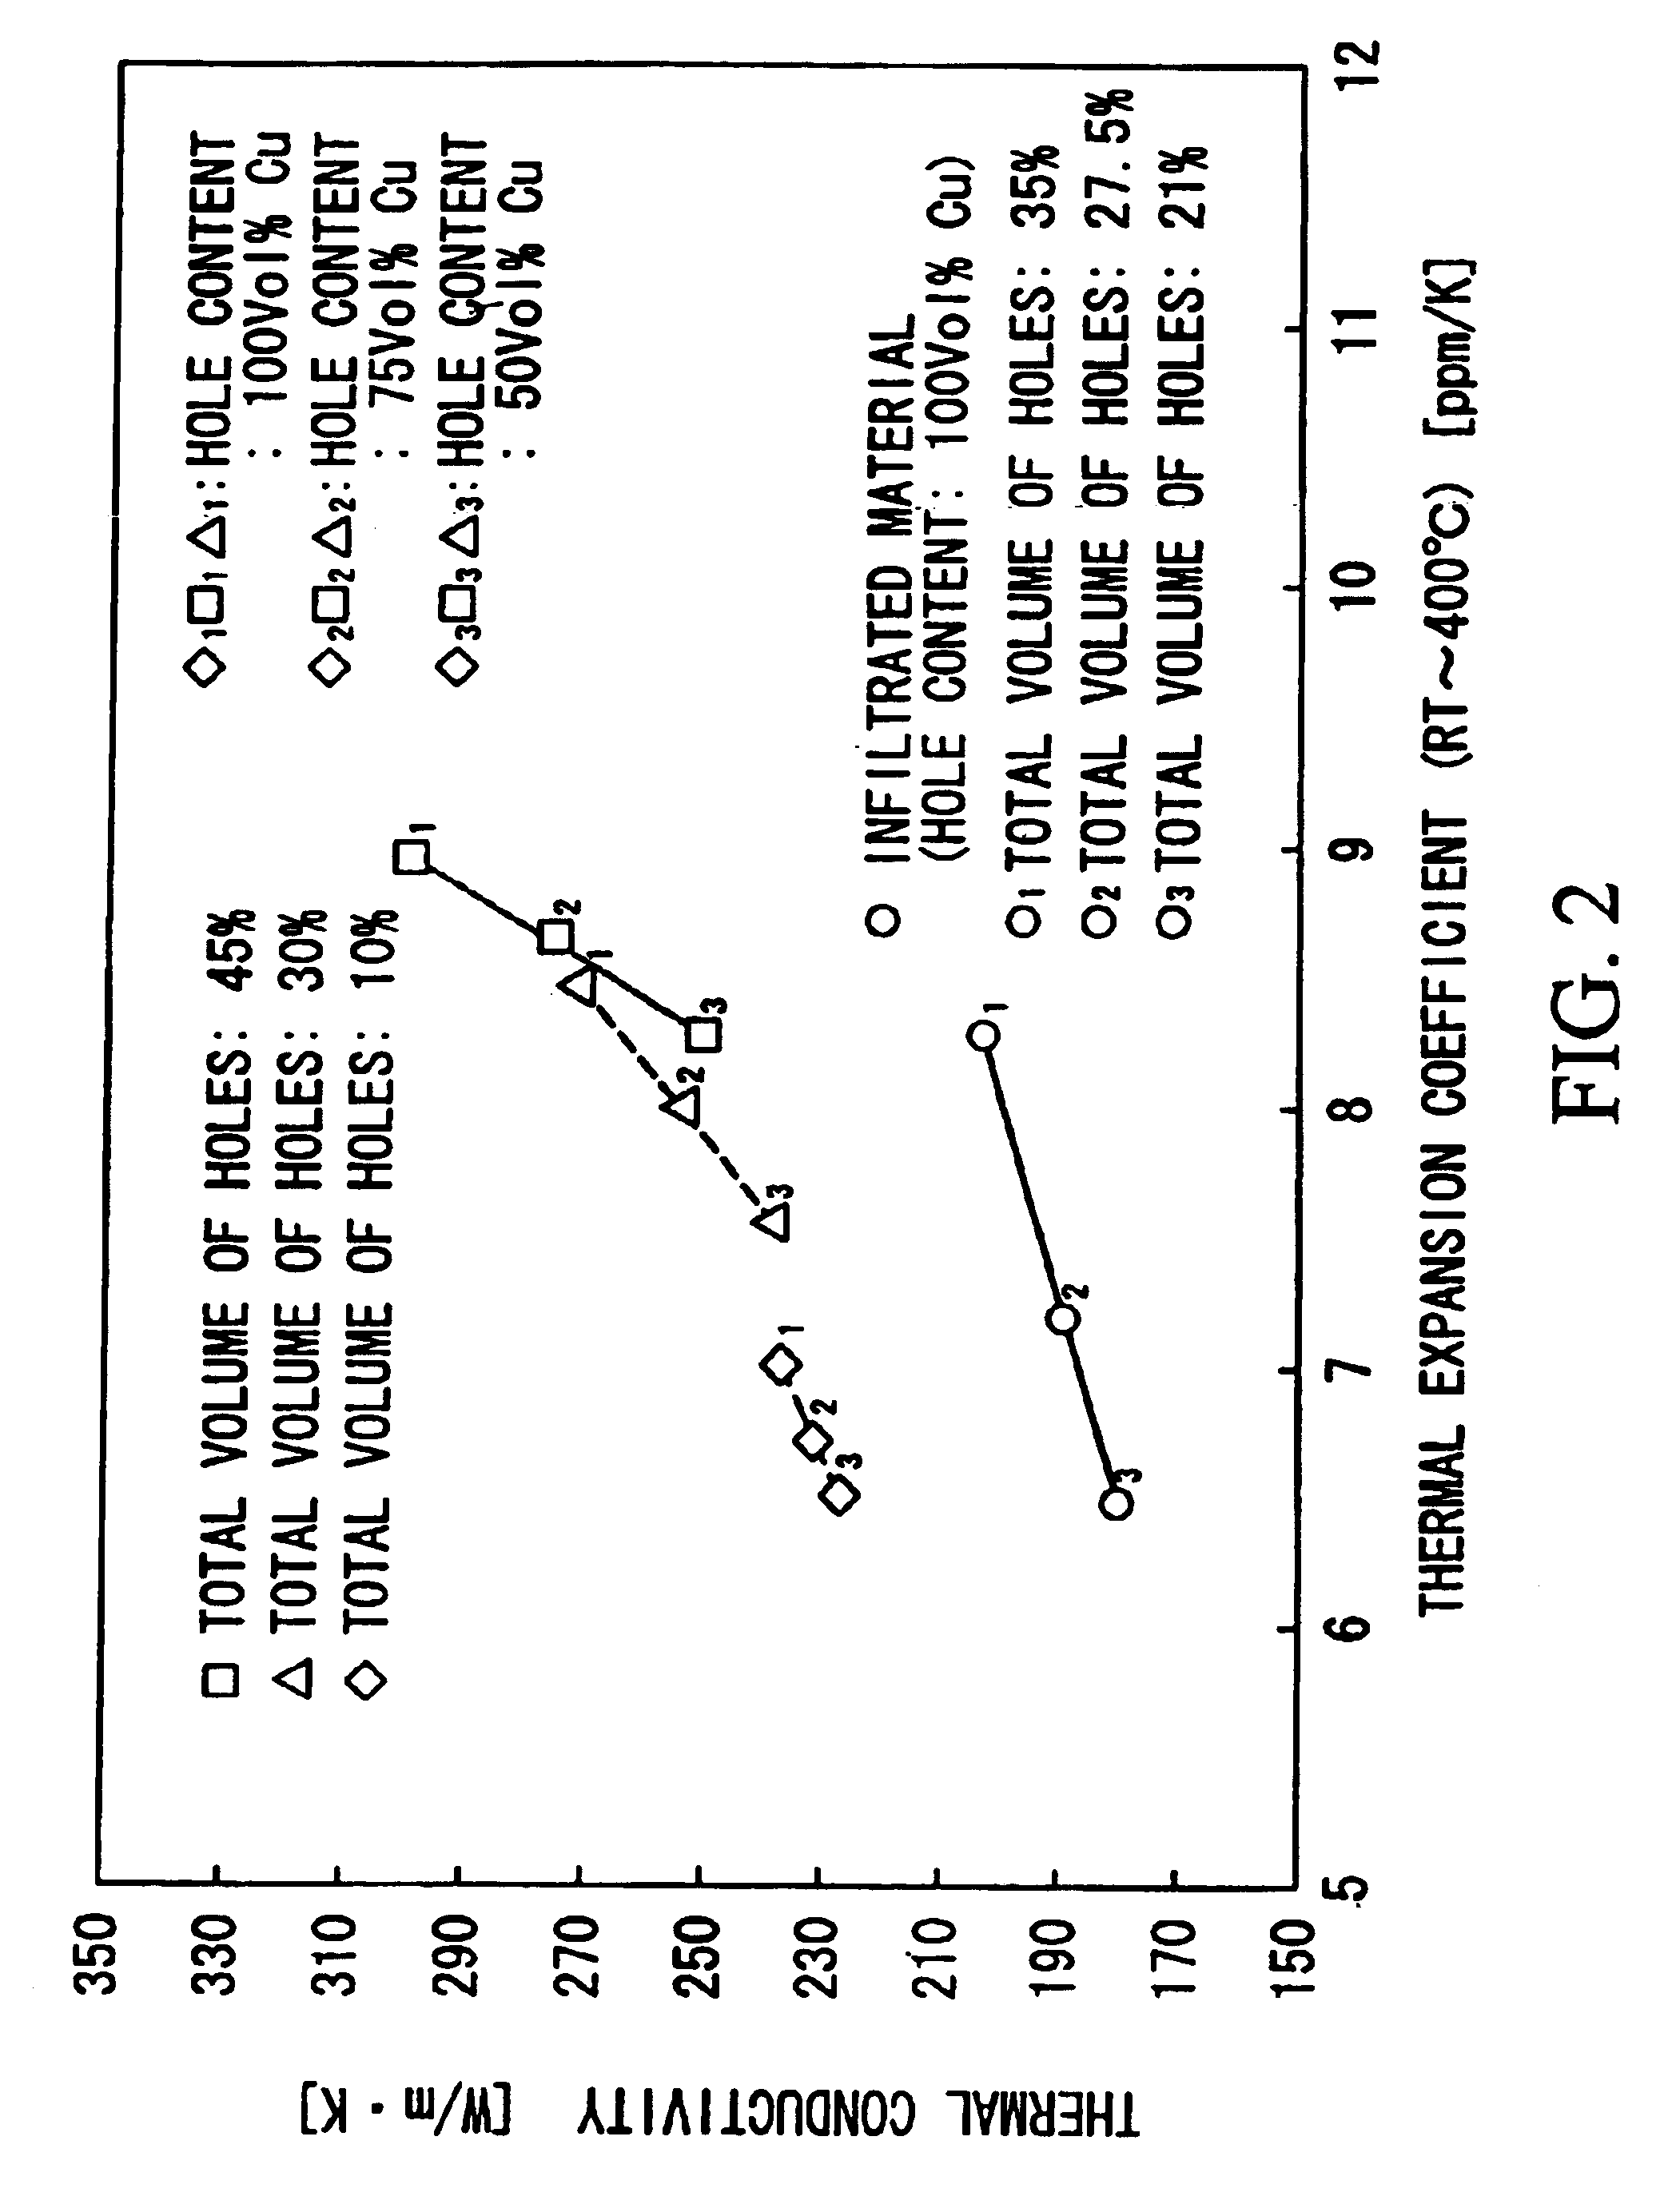 Heat radiator for electronic device and method of making it